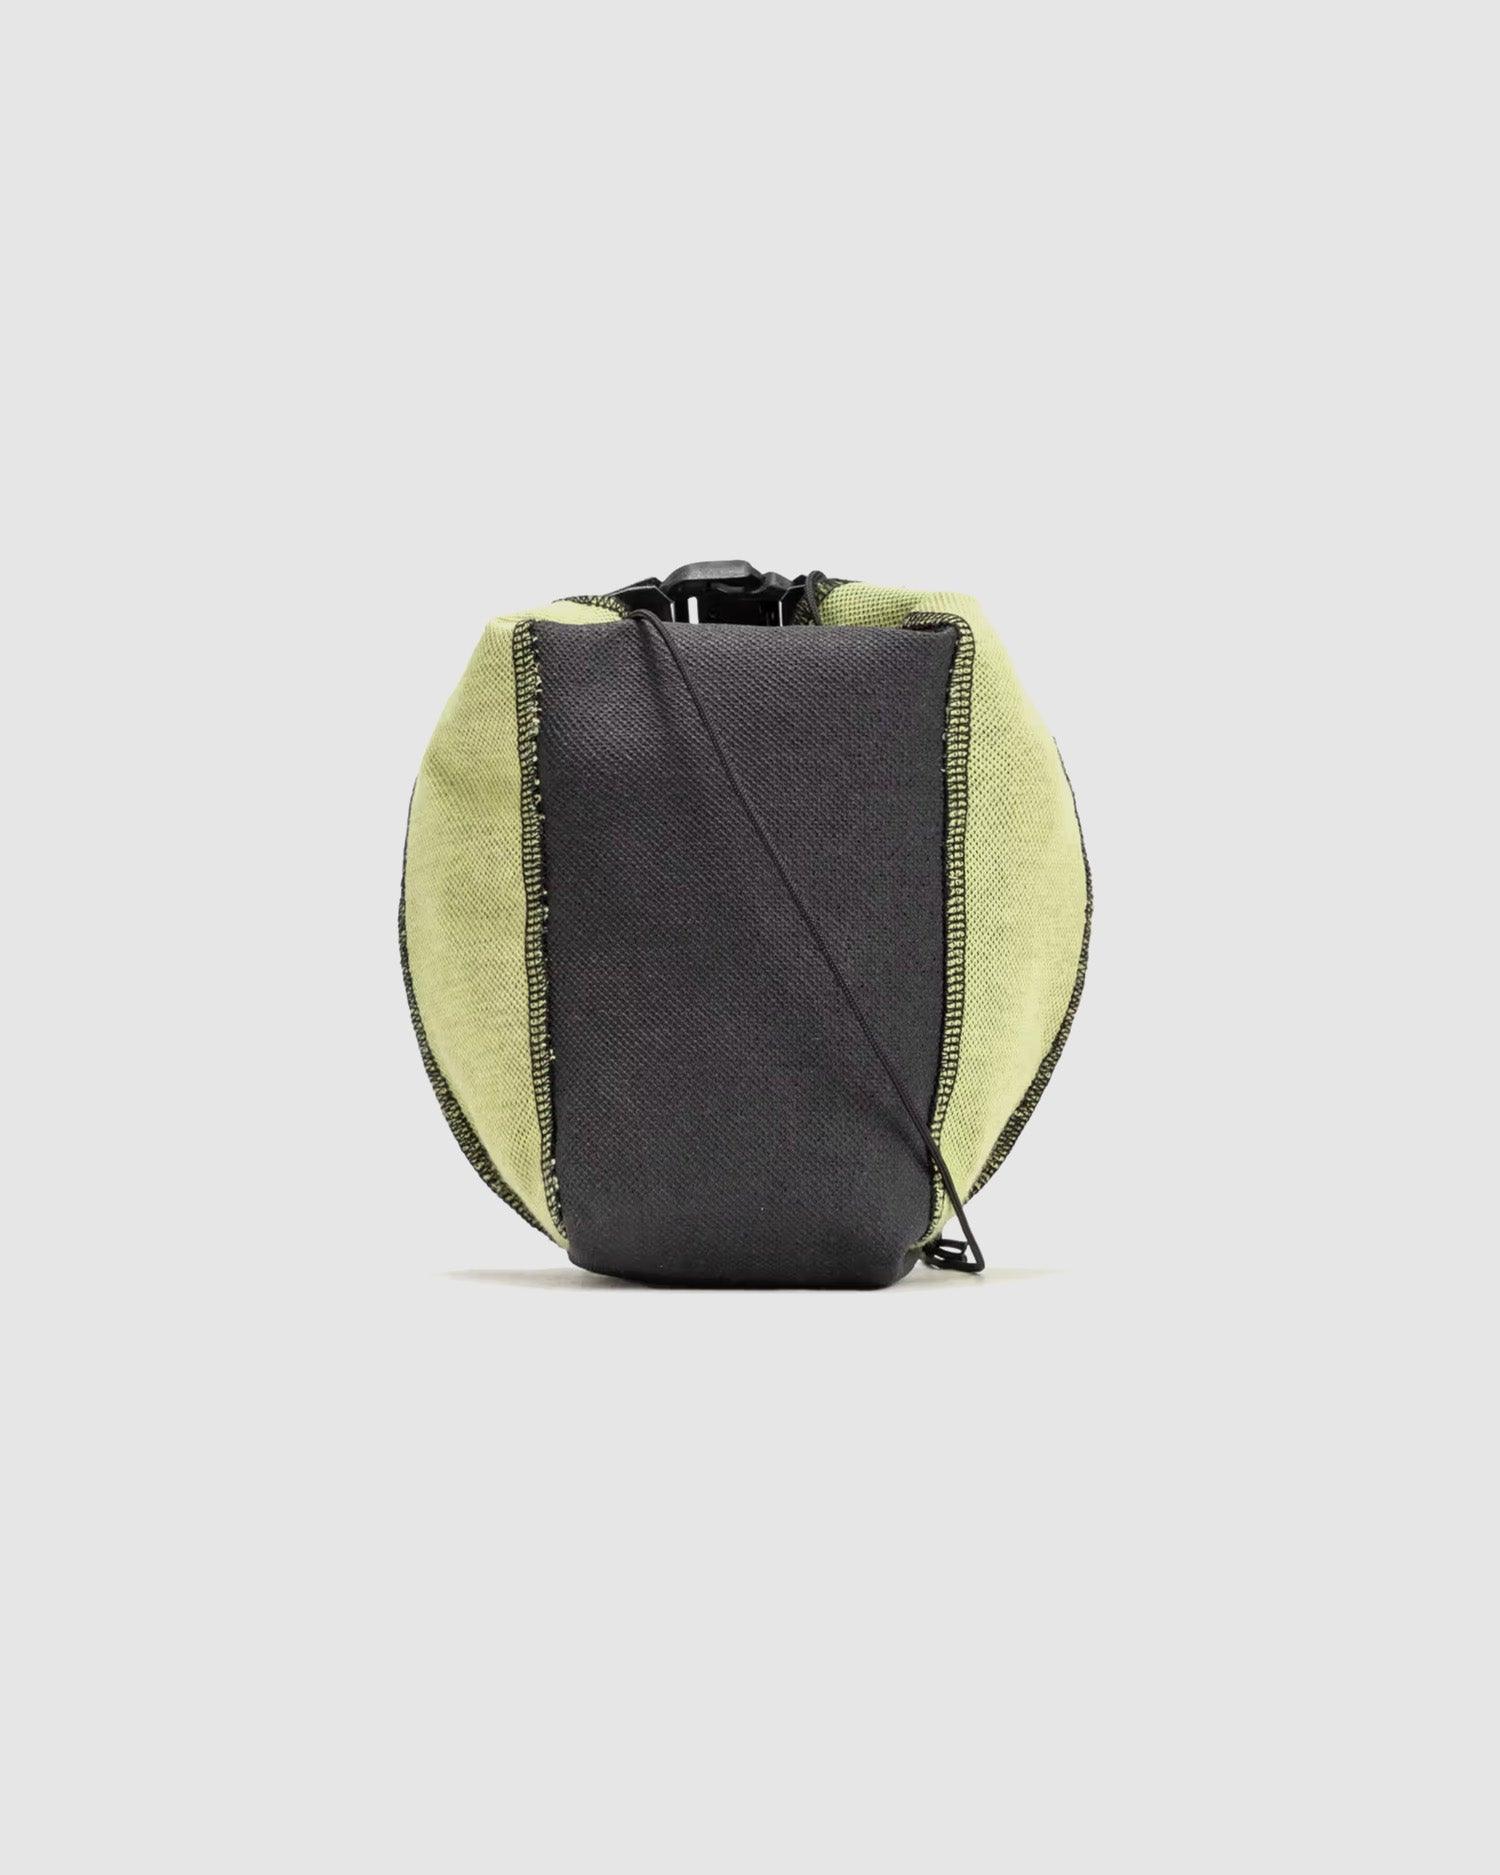 Aramidic Coated Knit Pautel Dry Sack Bag - {{ collection.title }} - Chinatown Country Club 